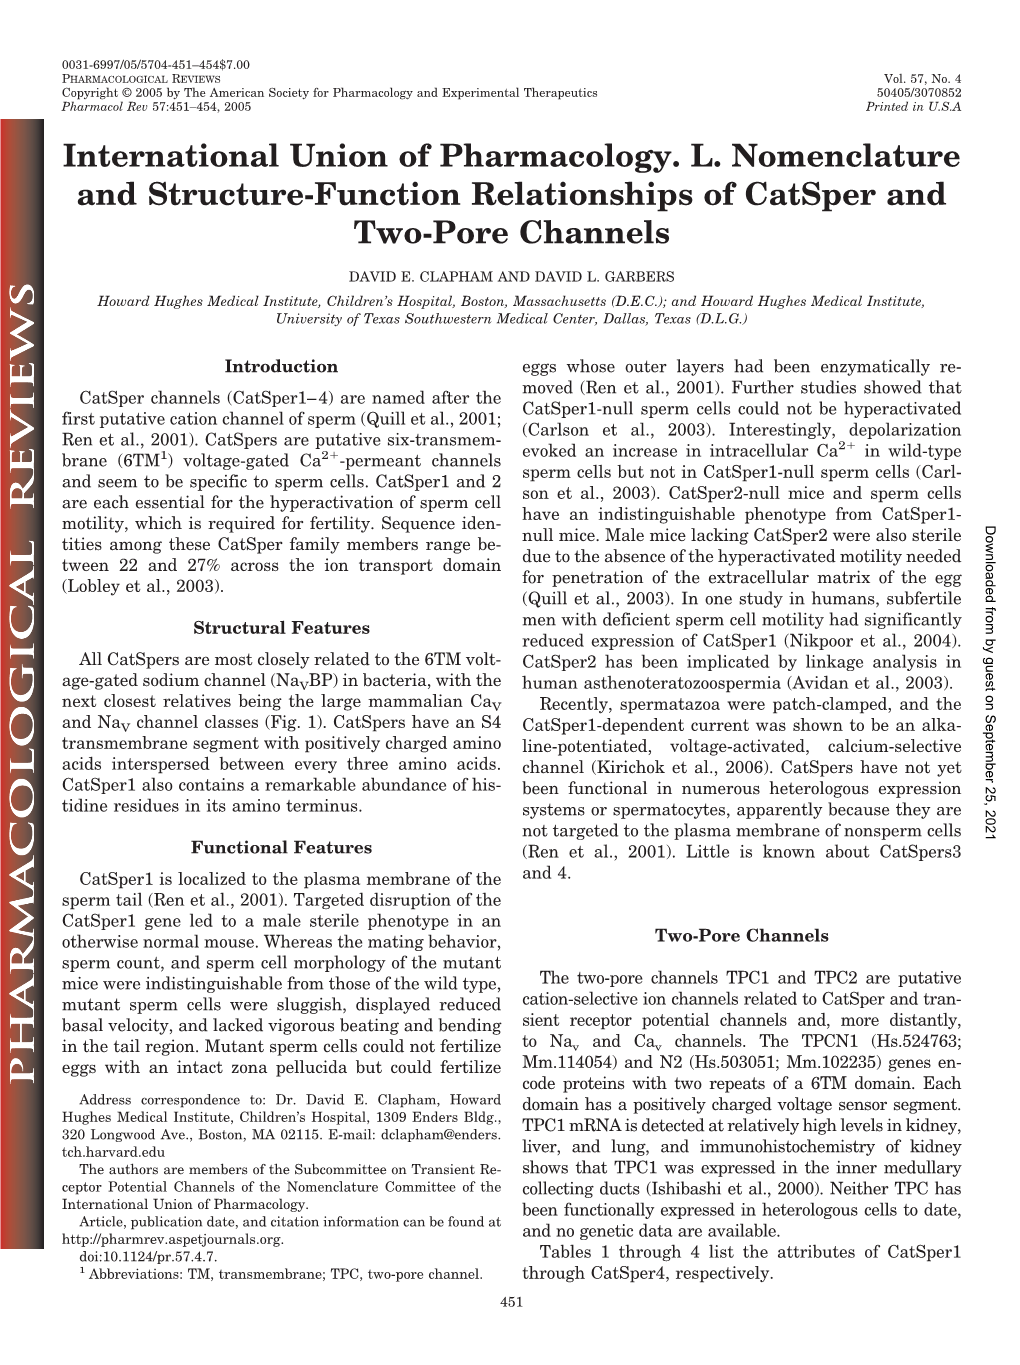 International Union of Pharmacology. L. Nomenclature and Structure-Function Relationships of Catsper and Two-Pore Channels